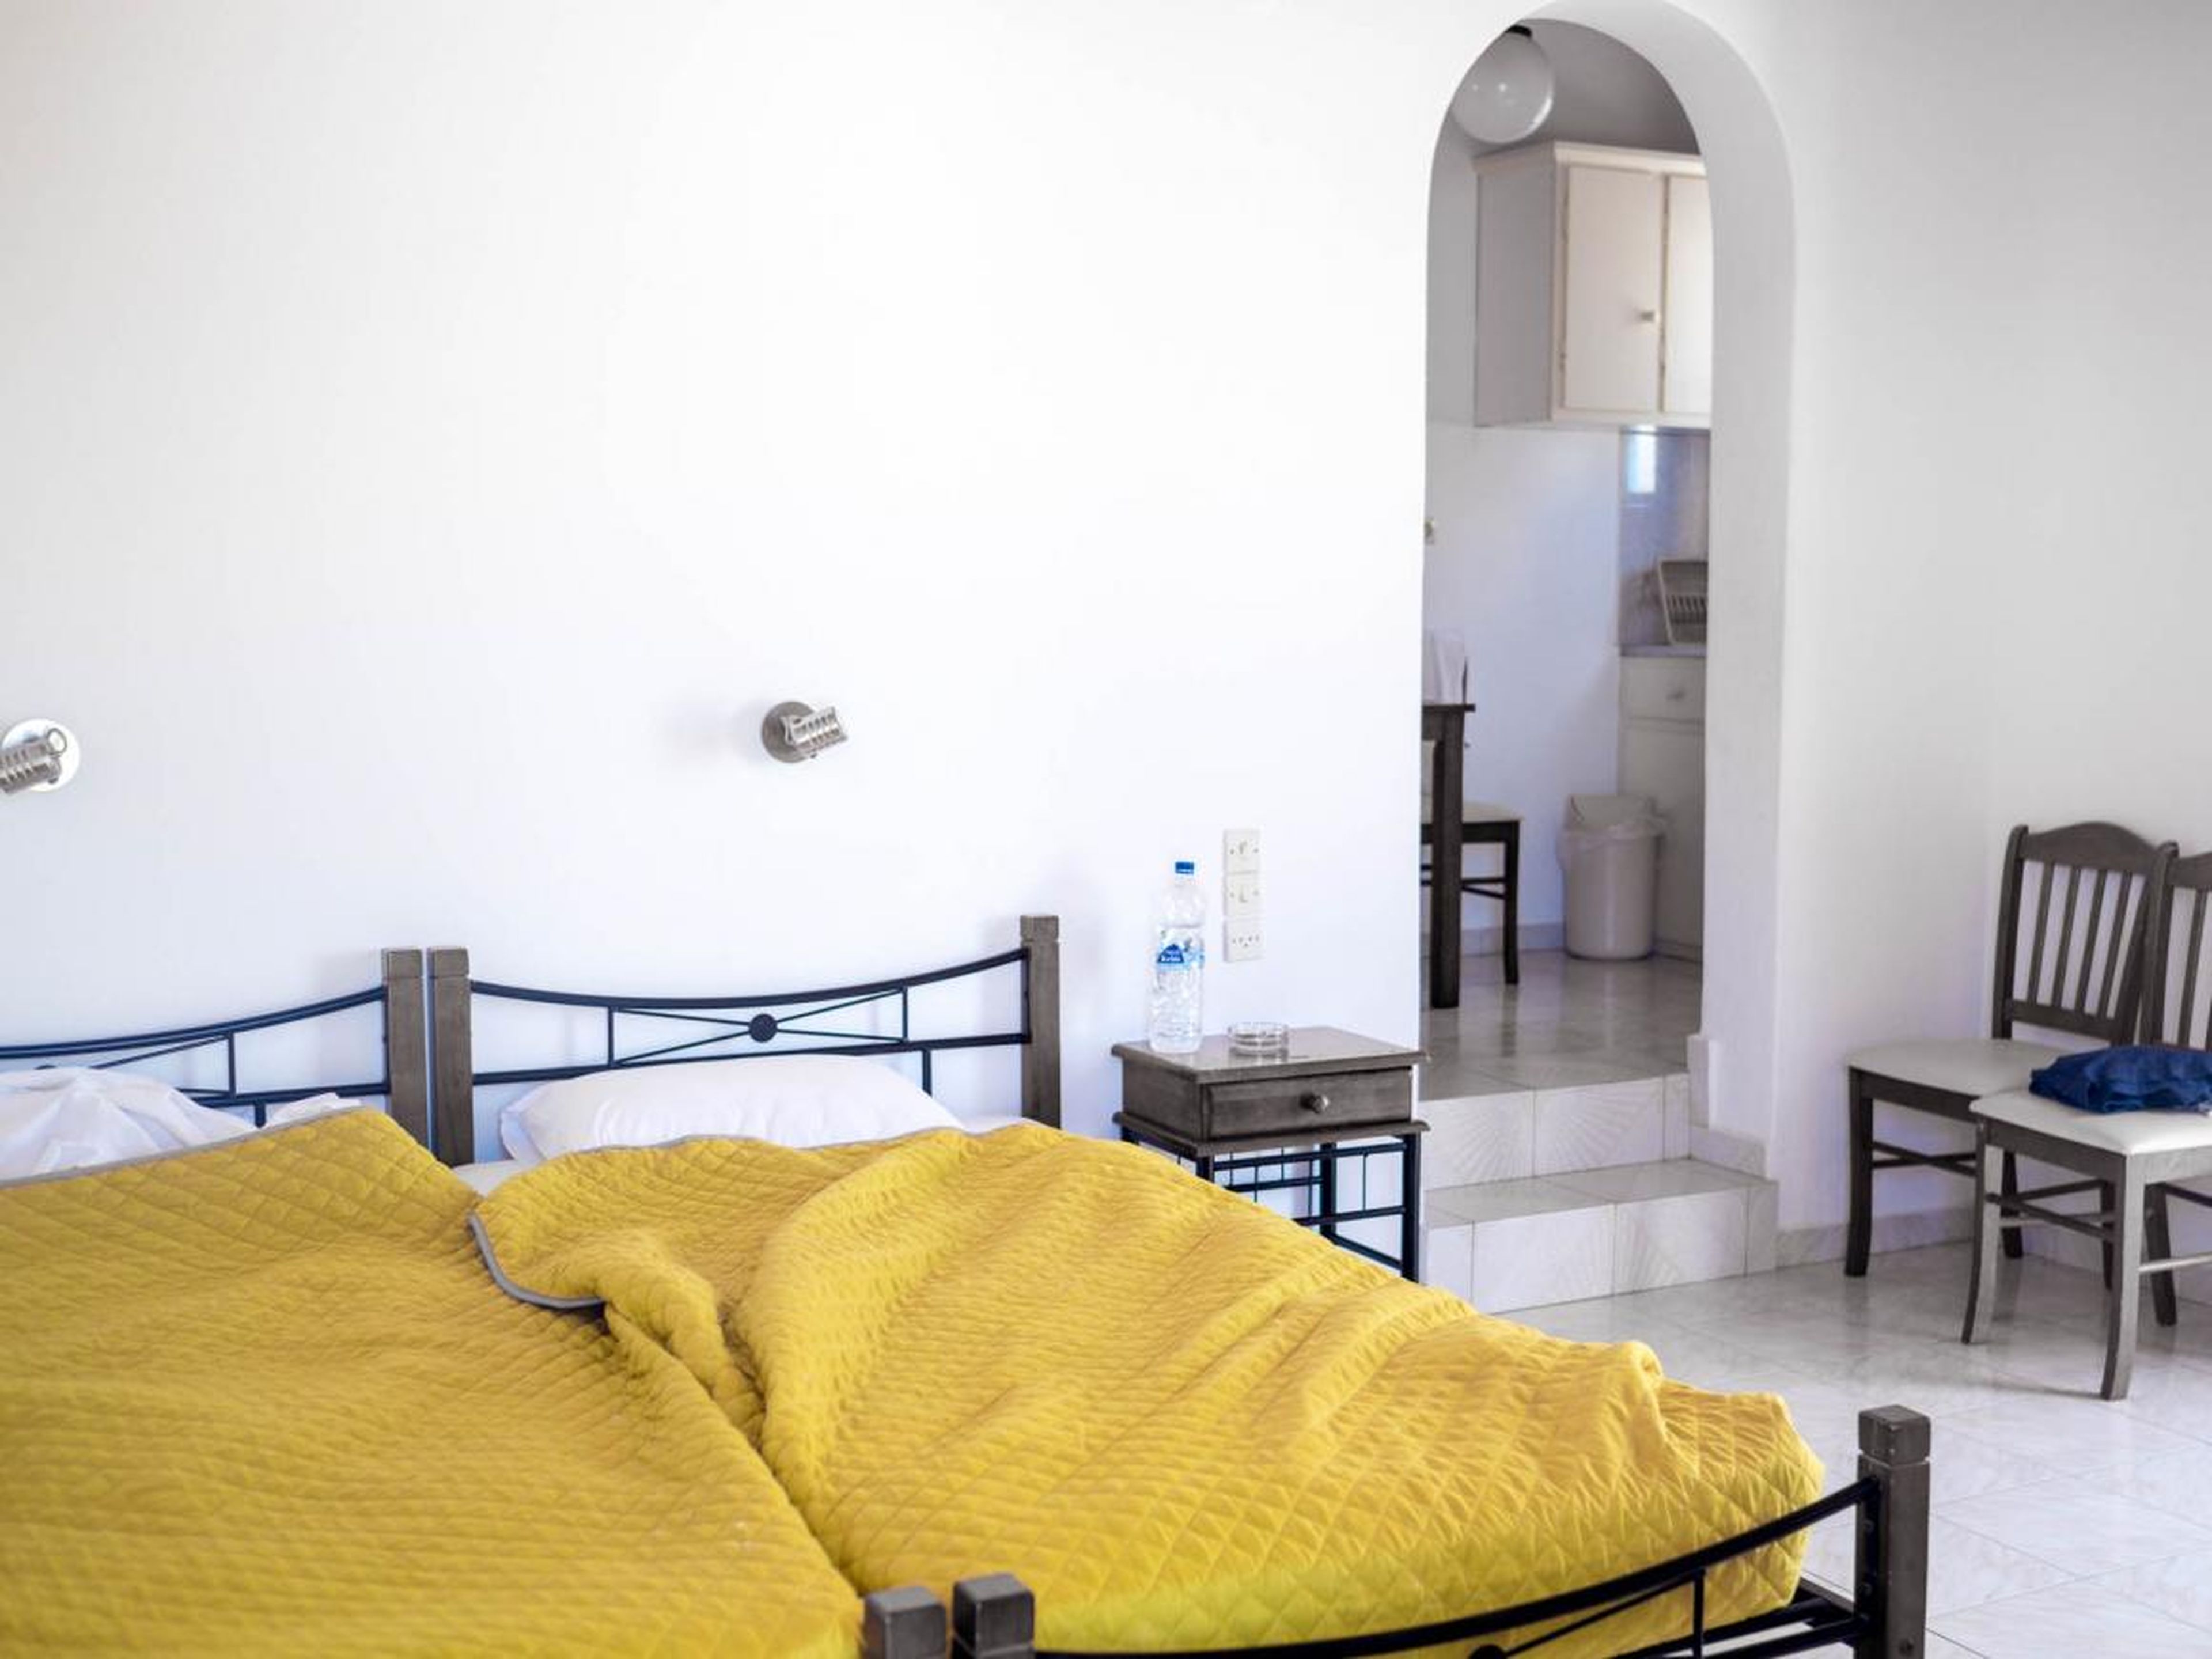 Whenever I travel, I try to approach it from both a budget and luxury perspective. Mykonos has a decent mix of budget hotels and guesthouses, but trying to book them in July was a mess. The cheapest (livable) place I could find